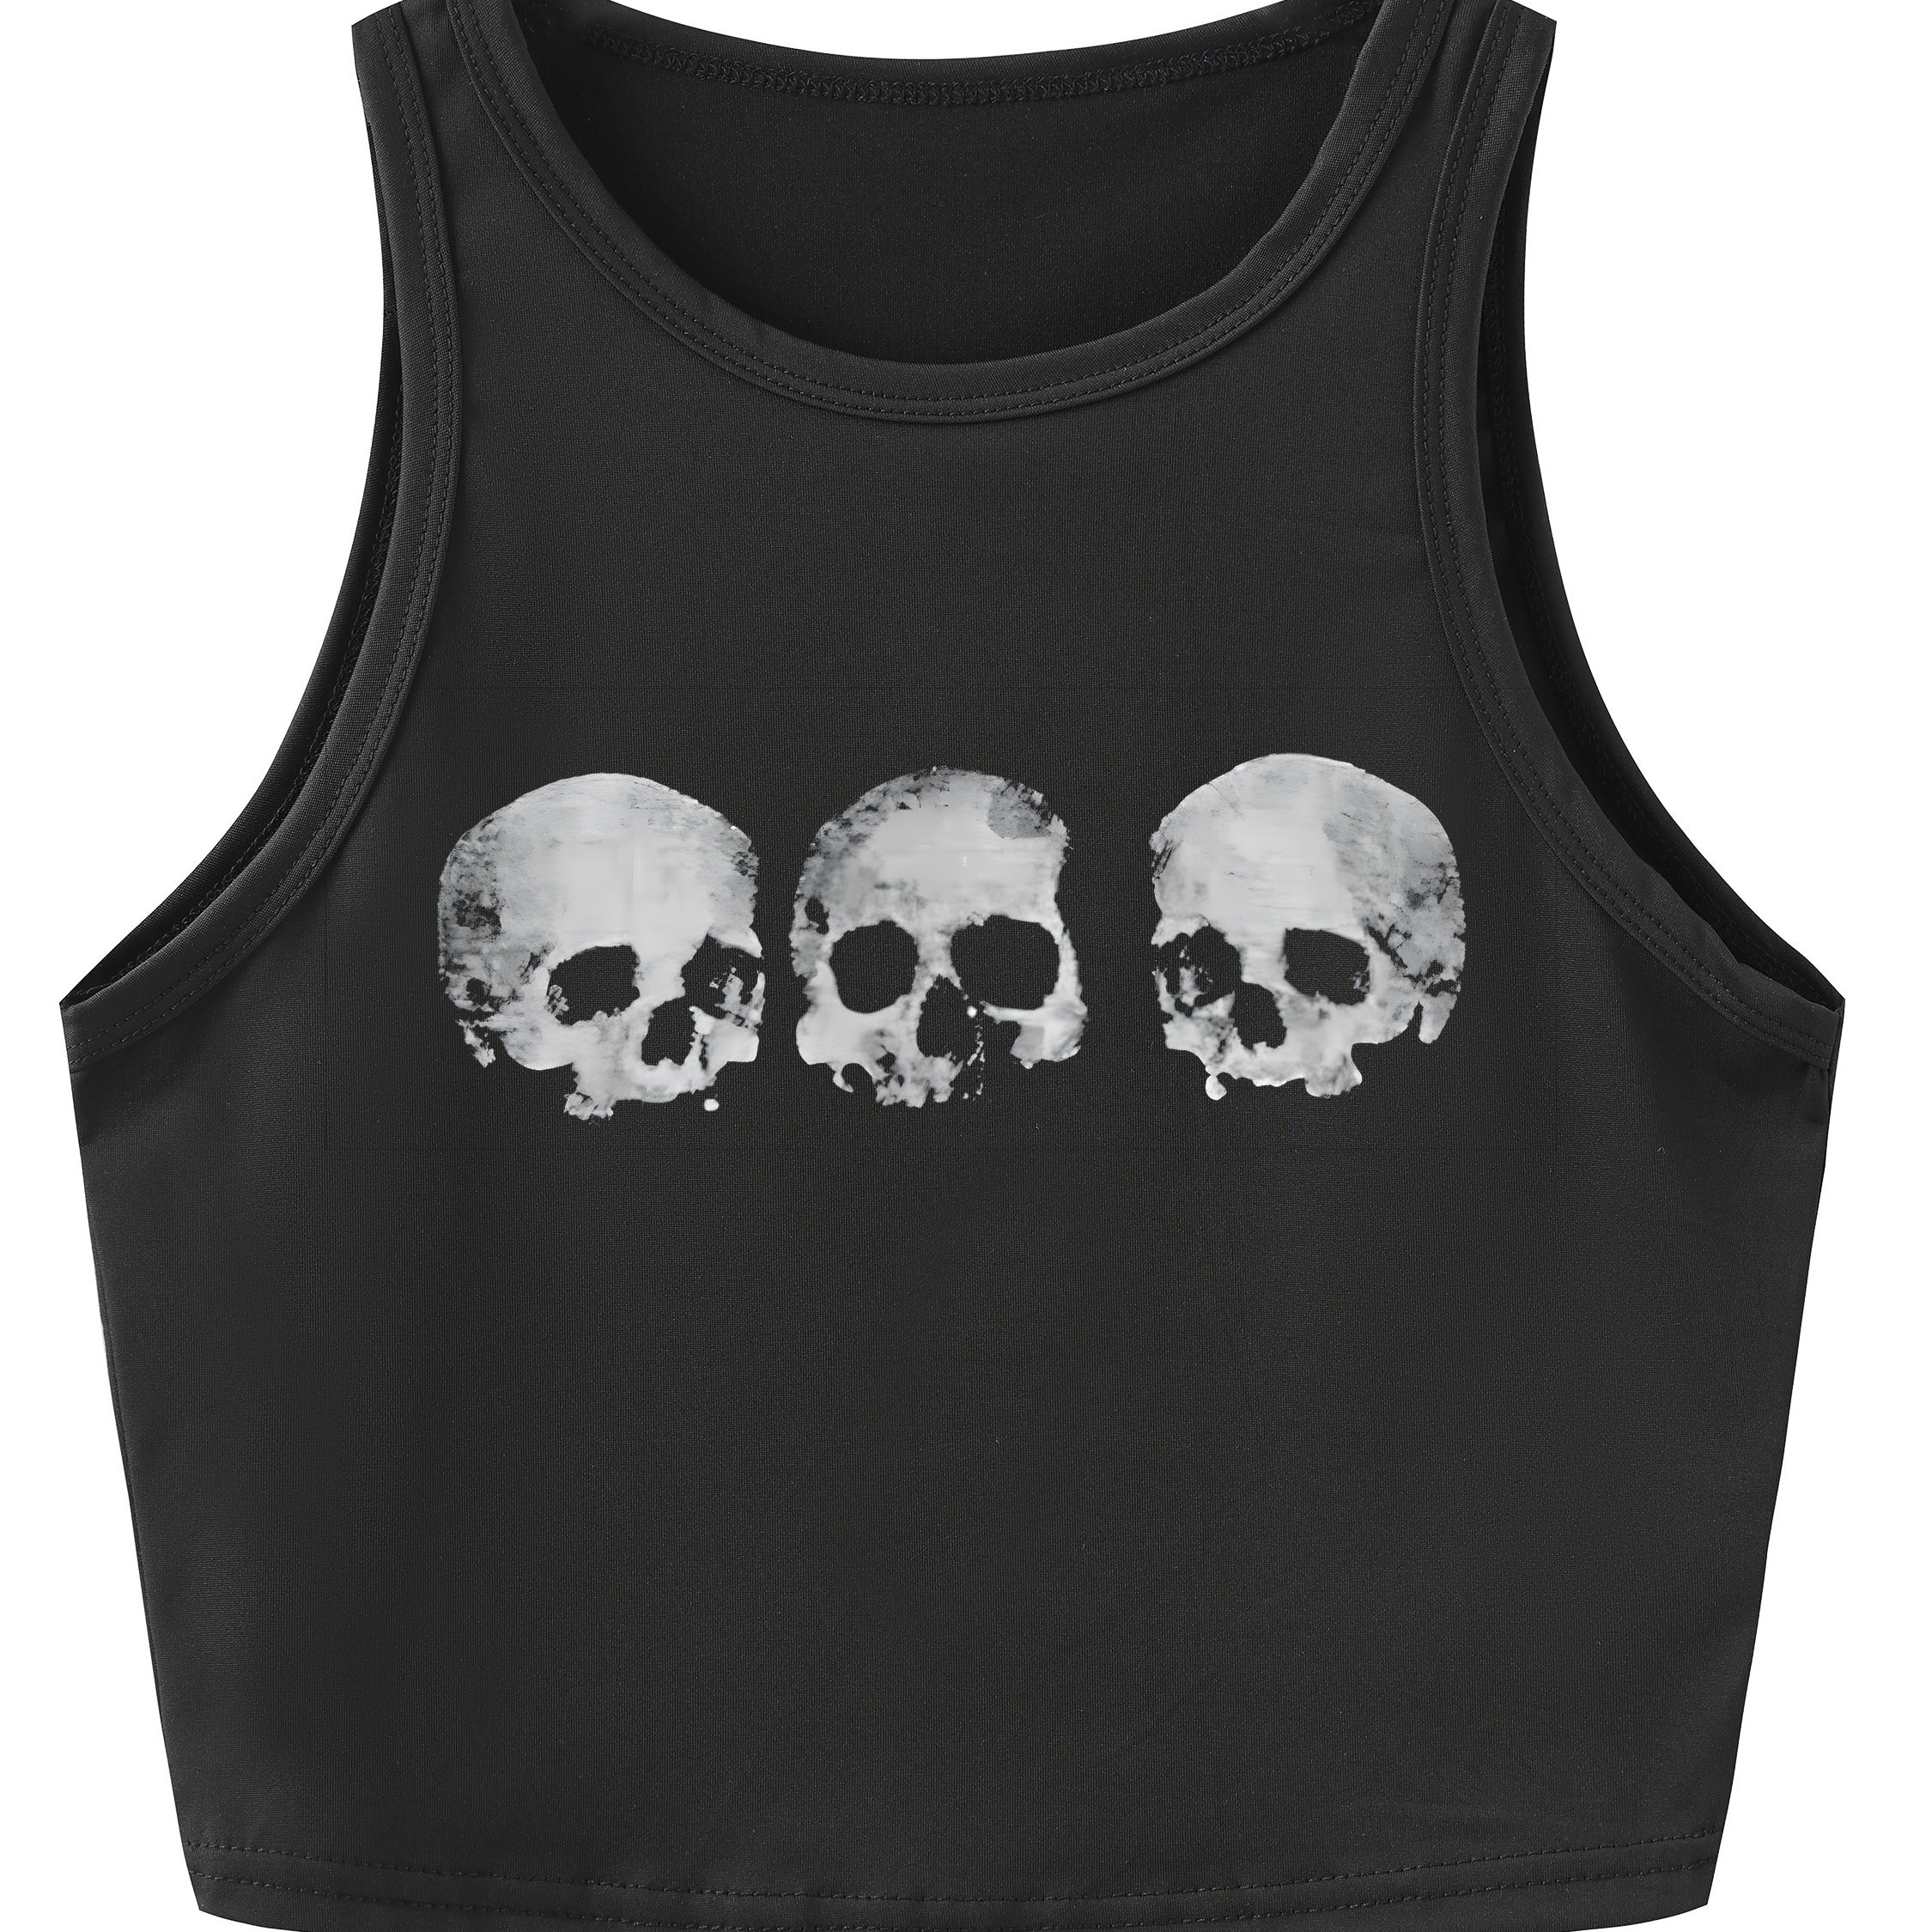 

Skull Print Tank Top, Casual Crew Neck Summer Sleeveless Top, Women's Clothing For Y2k/grunge Style